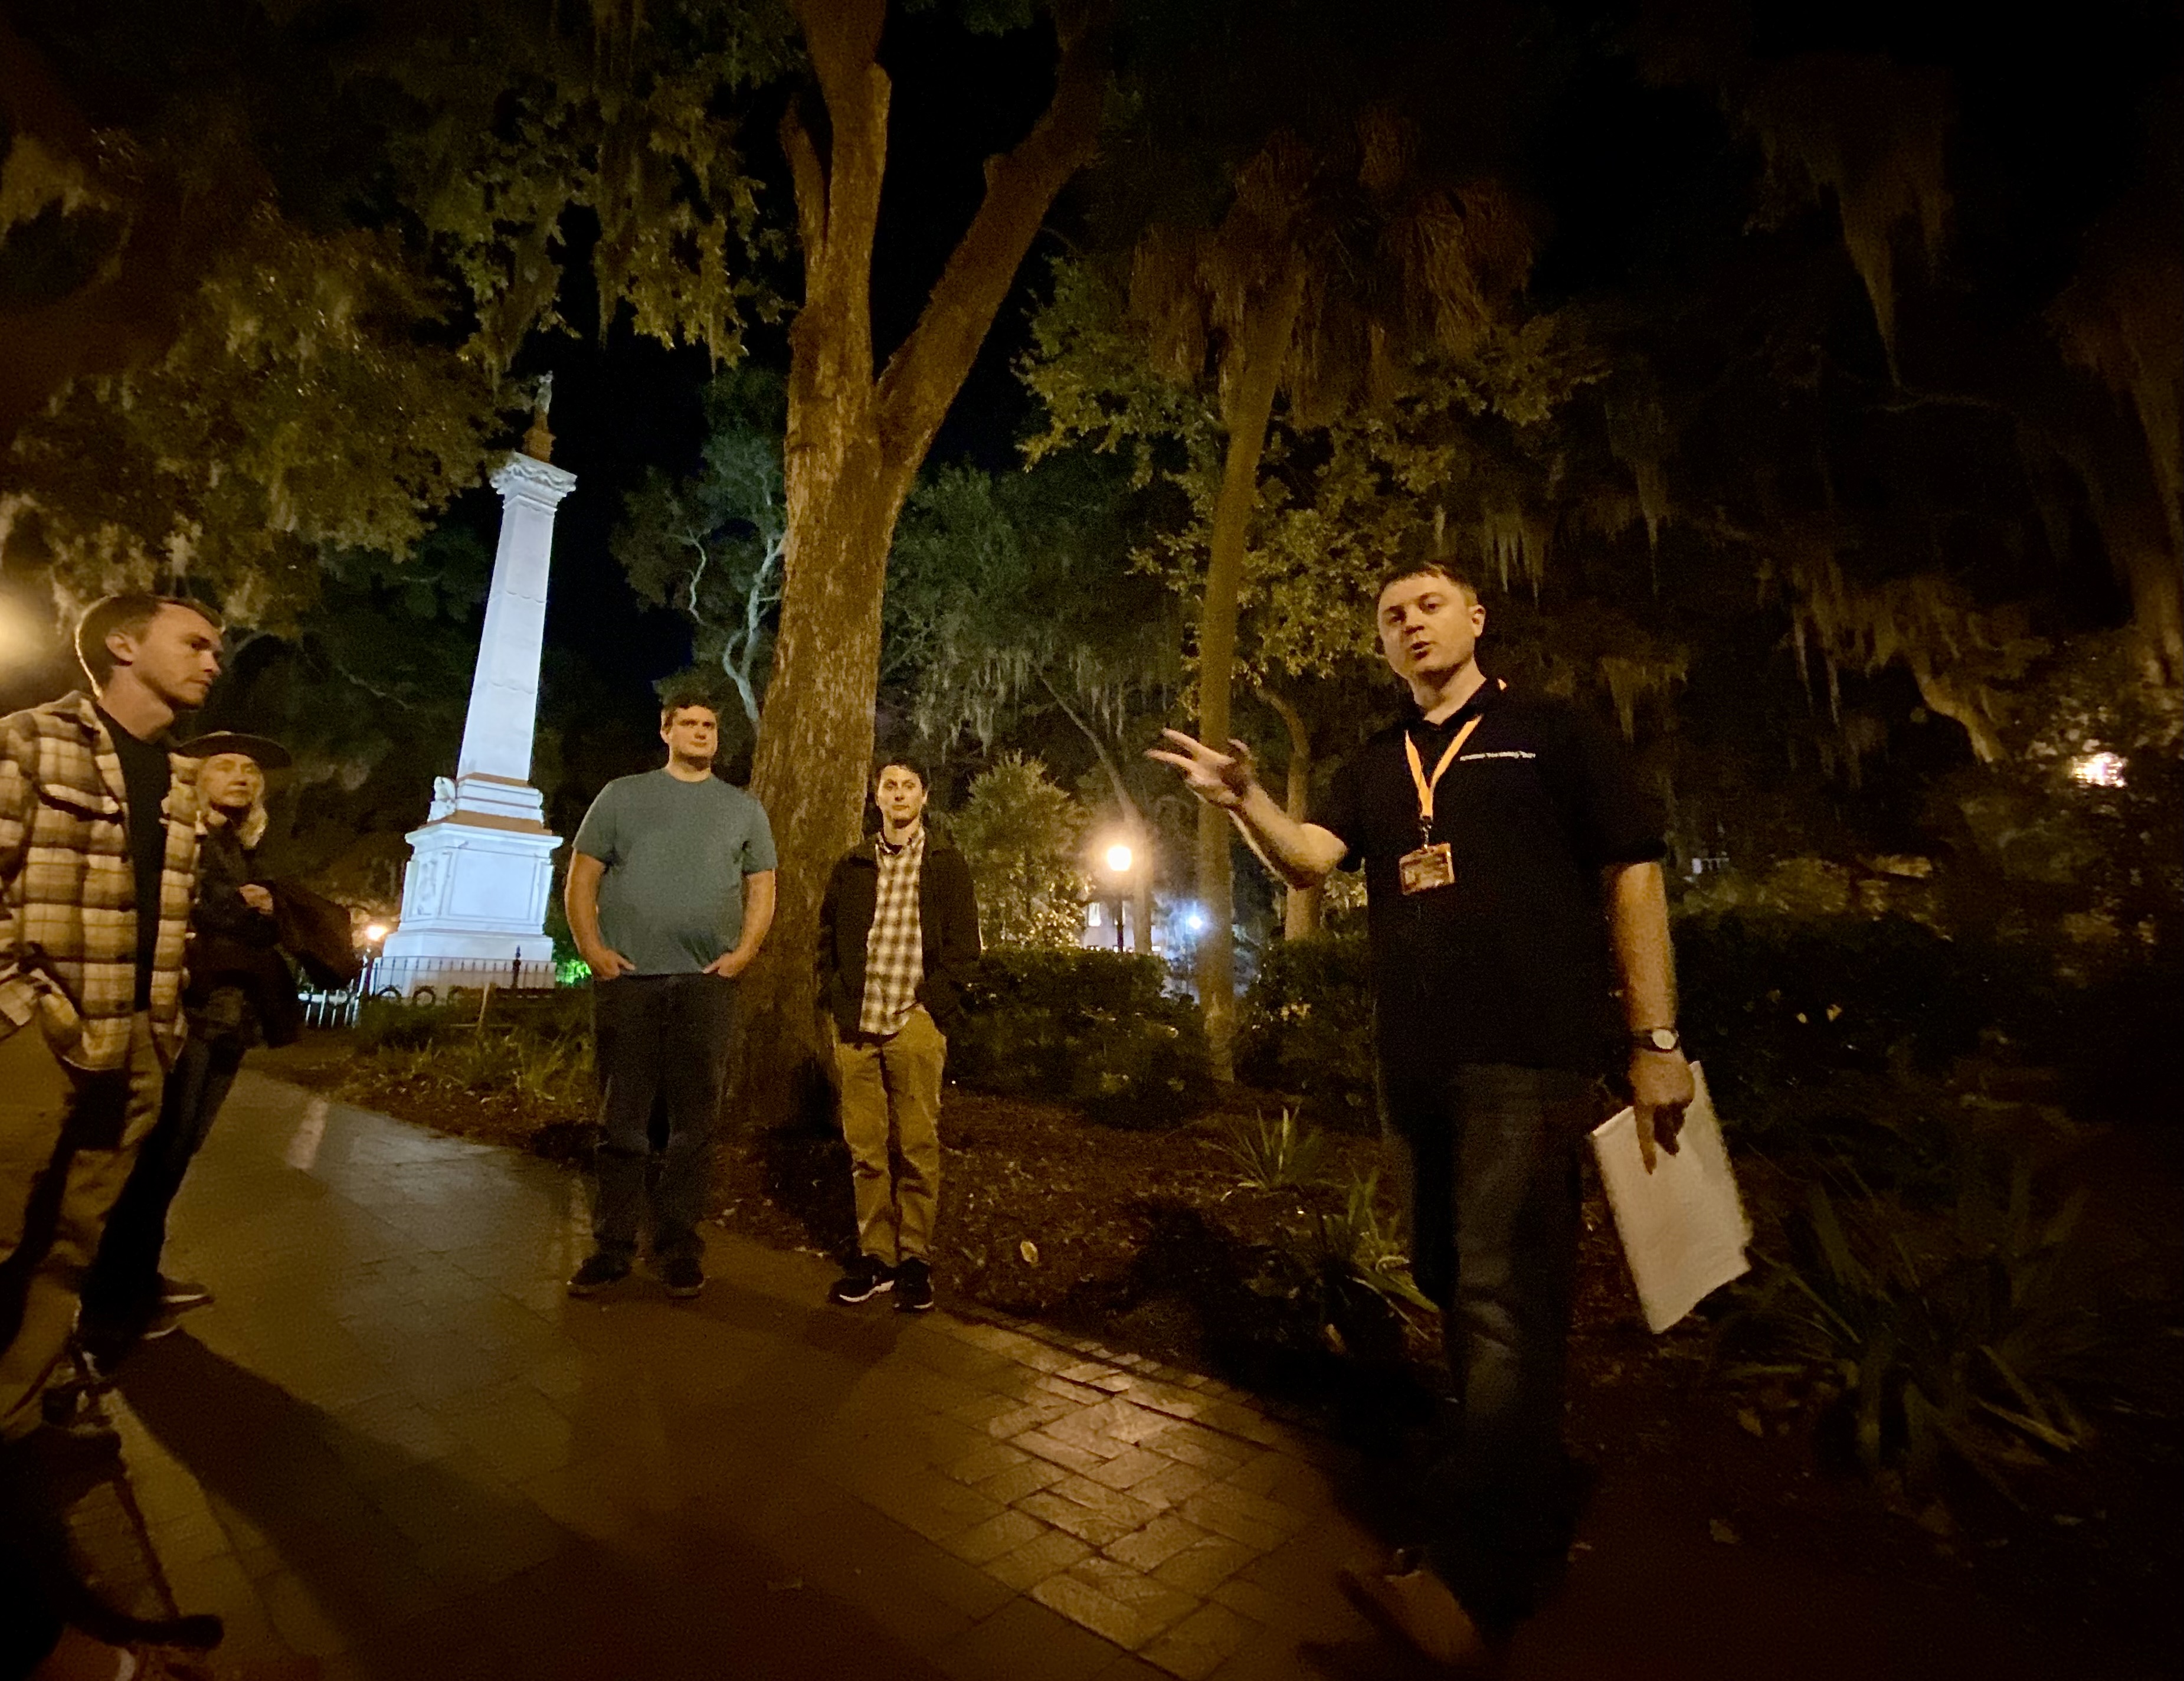 Anything but a ghost tour Savannah Dark History Tour serves up frights